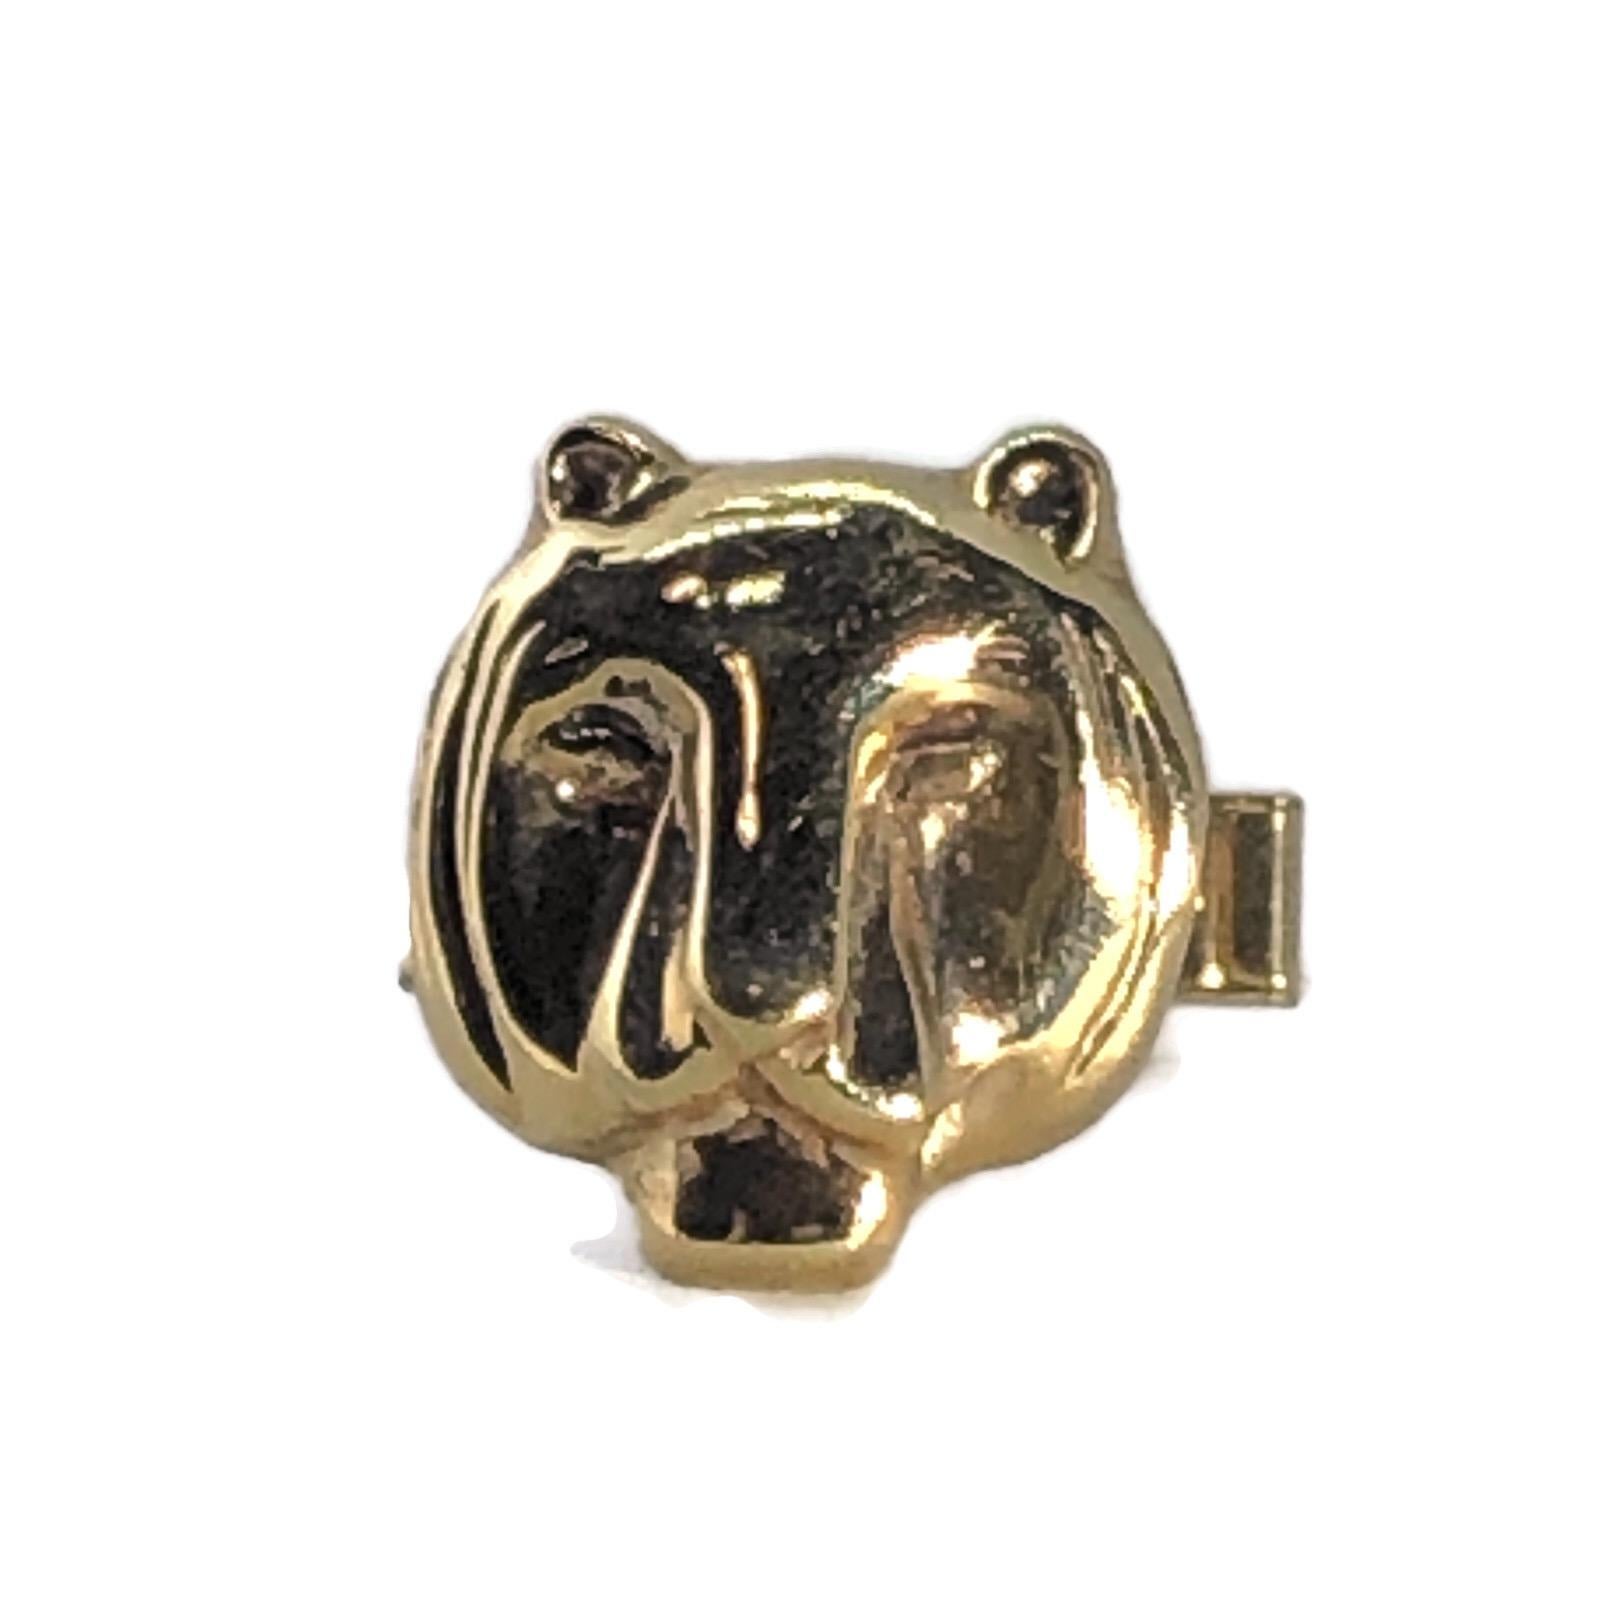 Vintage Unisex Cufflinks in Lion and Lioness Design Made in 14 Karat Yellow Gold For Sale 1